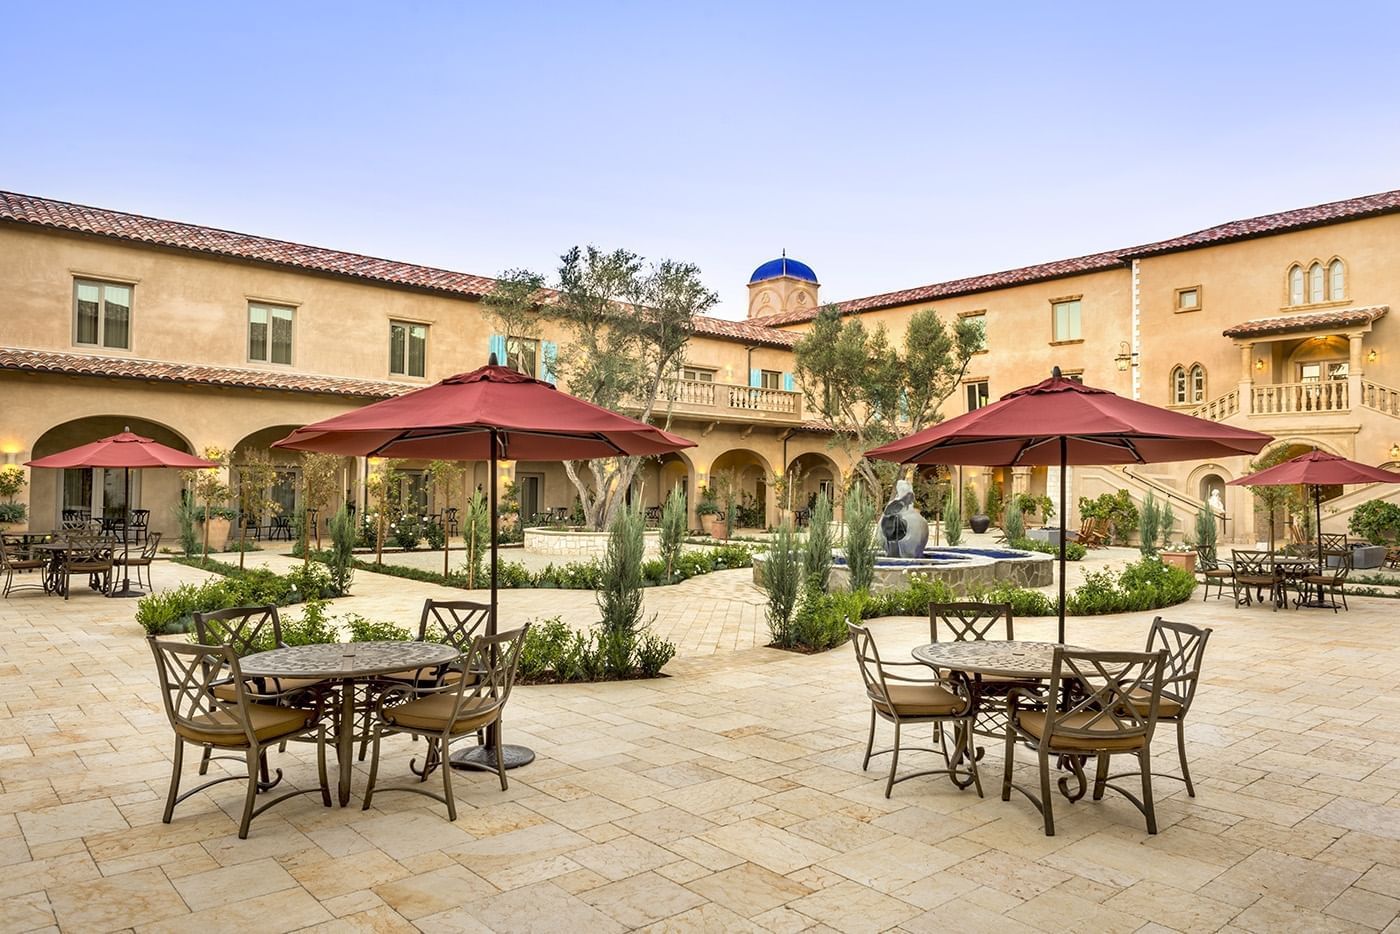 Courtyard at Allegretto Vineyard Resort with round table seating